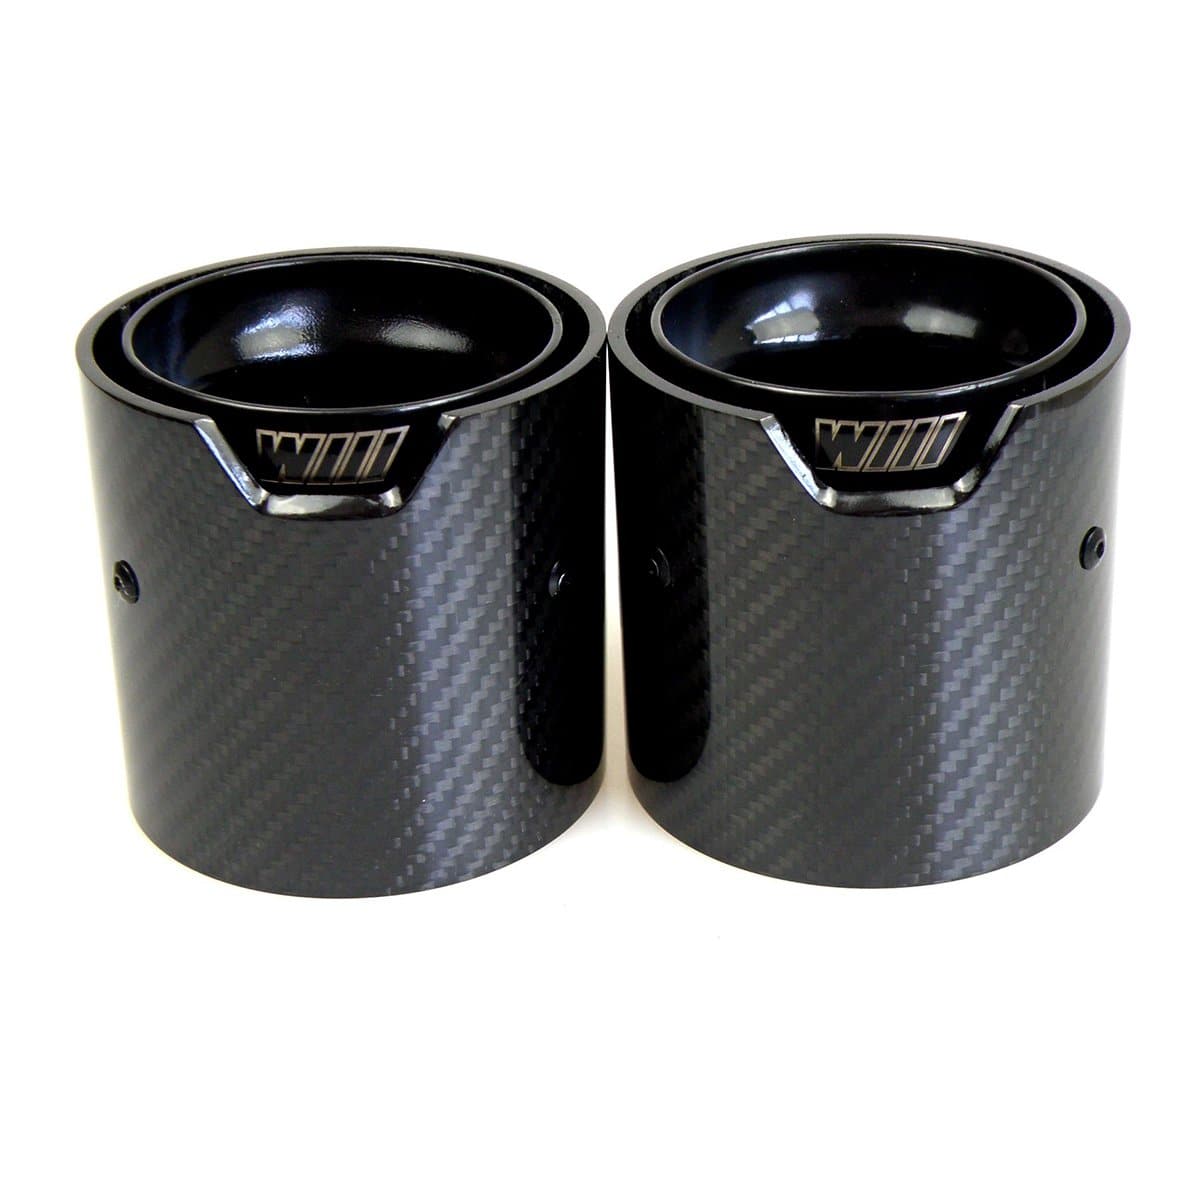  BMW M5 (F90/F90N) Black M Performance Carbon Fibre Exhaust Tips - Designed in the M Performance Styling for the M Series BMW Models These exhaust tips are a combination of either a Matt Carbon or Gloss Carbon Shell finished with High-Temperature Gloss Black Paint Finish with a laser-etched M Logo creating a stunning finish to all M Series BMW Models. 